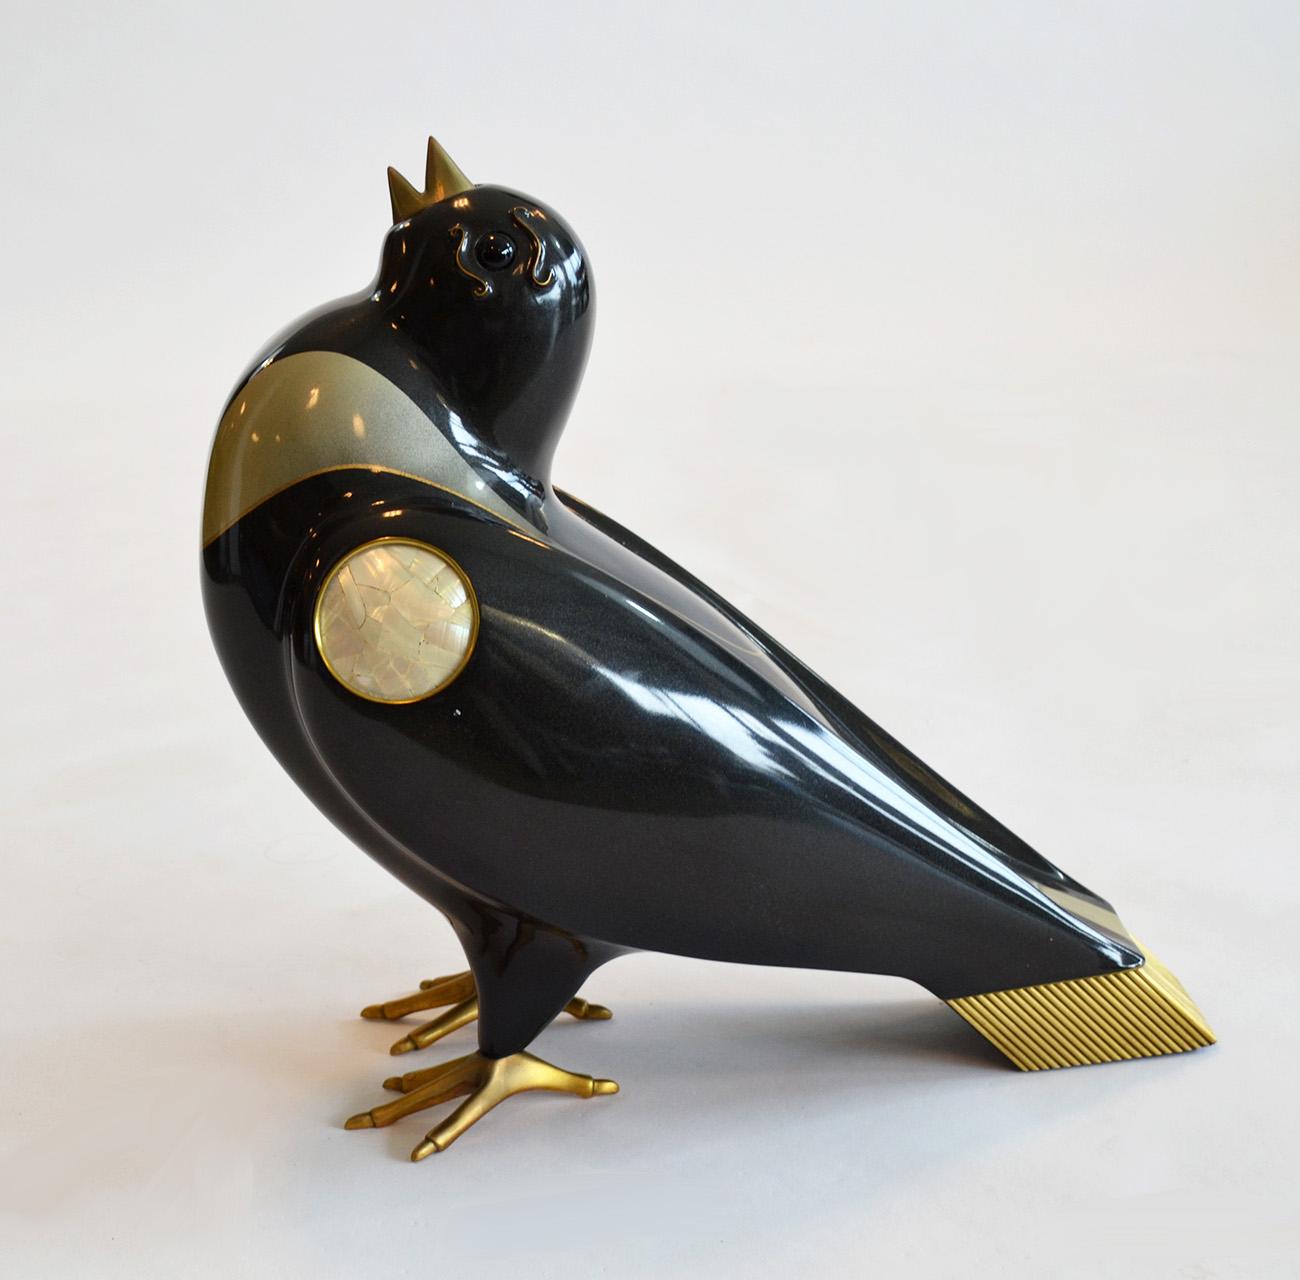 Rare Pair of large Birds or Chickadee sculptures / figures by Jonson & Marcius in black lacquered cast resin with mother of pearl cabochons and brass insets, feet and beaks purchased from Lorin Marsh, Miami, FL 1977. This rare set is one of only